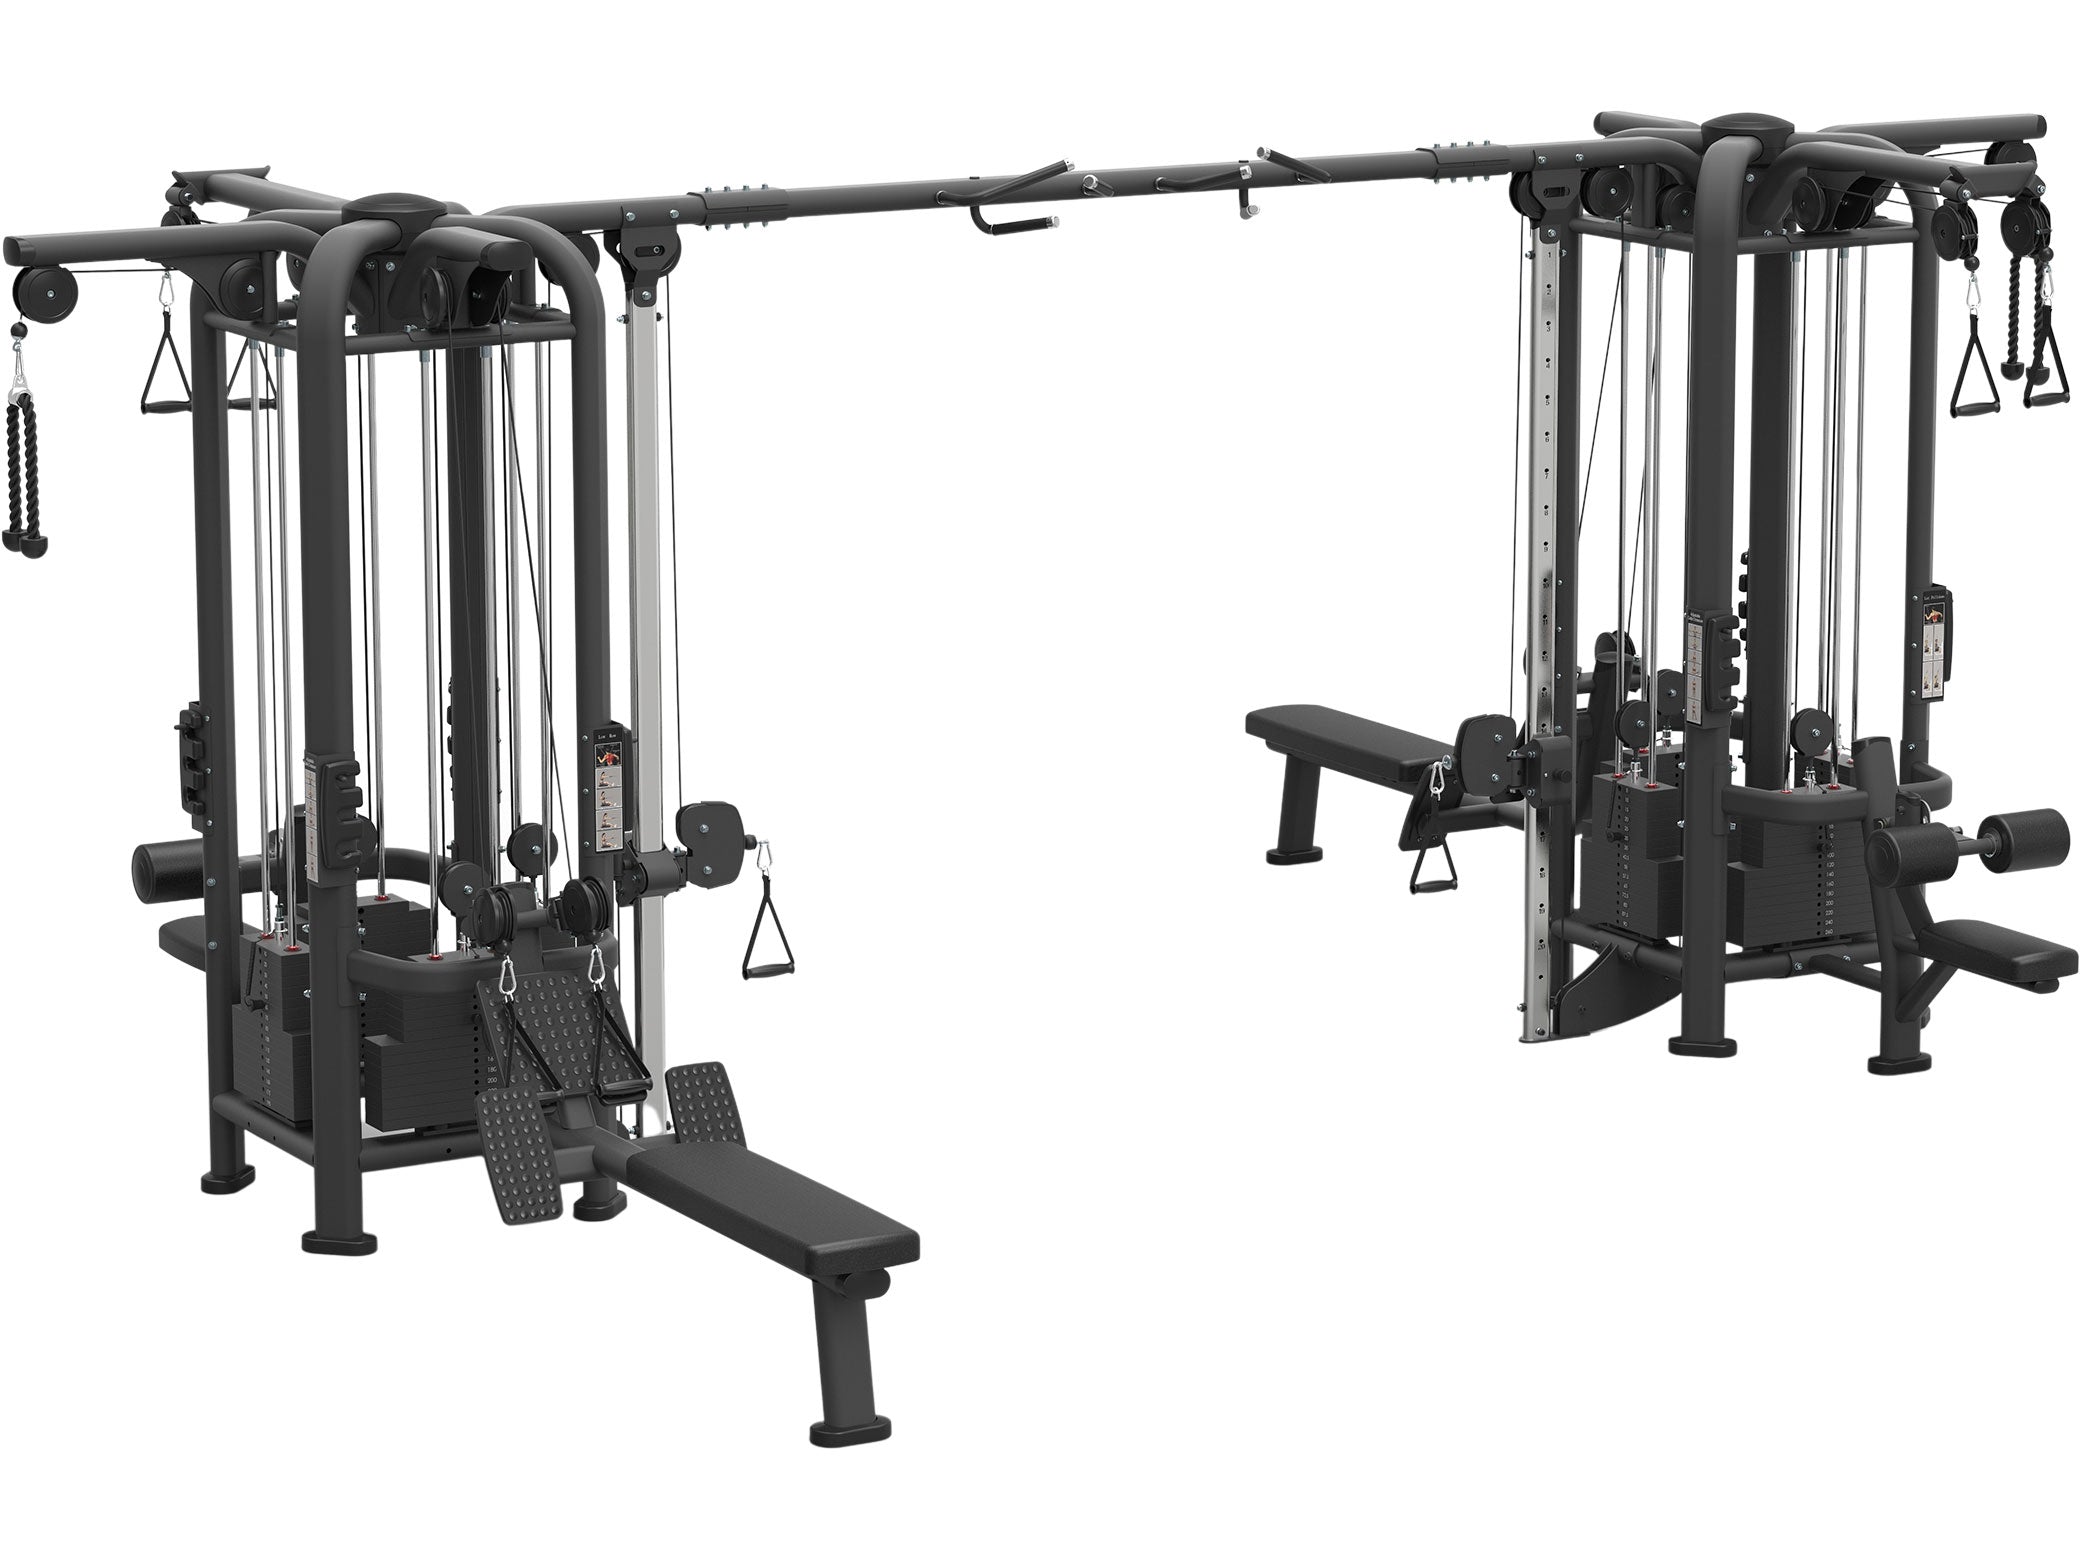 Sportgear MJ8 Multi Jungle with Dual Pulley Pulldown and Row